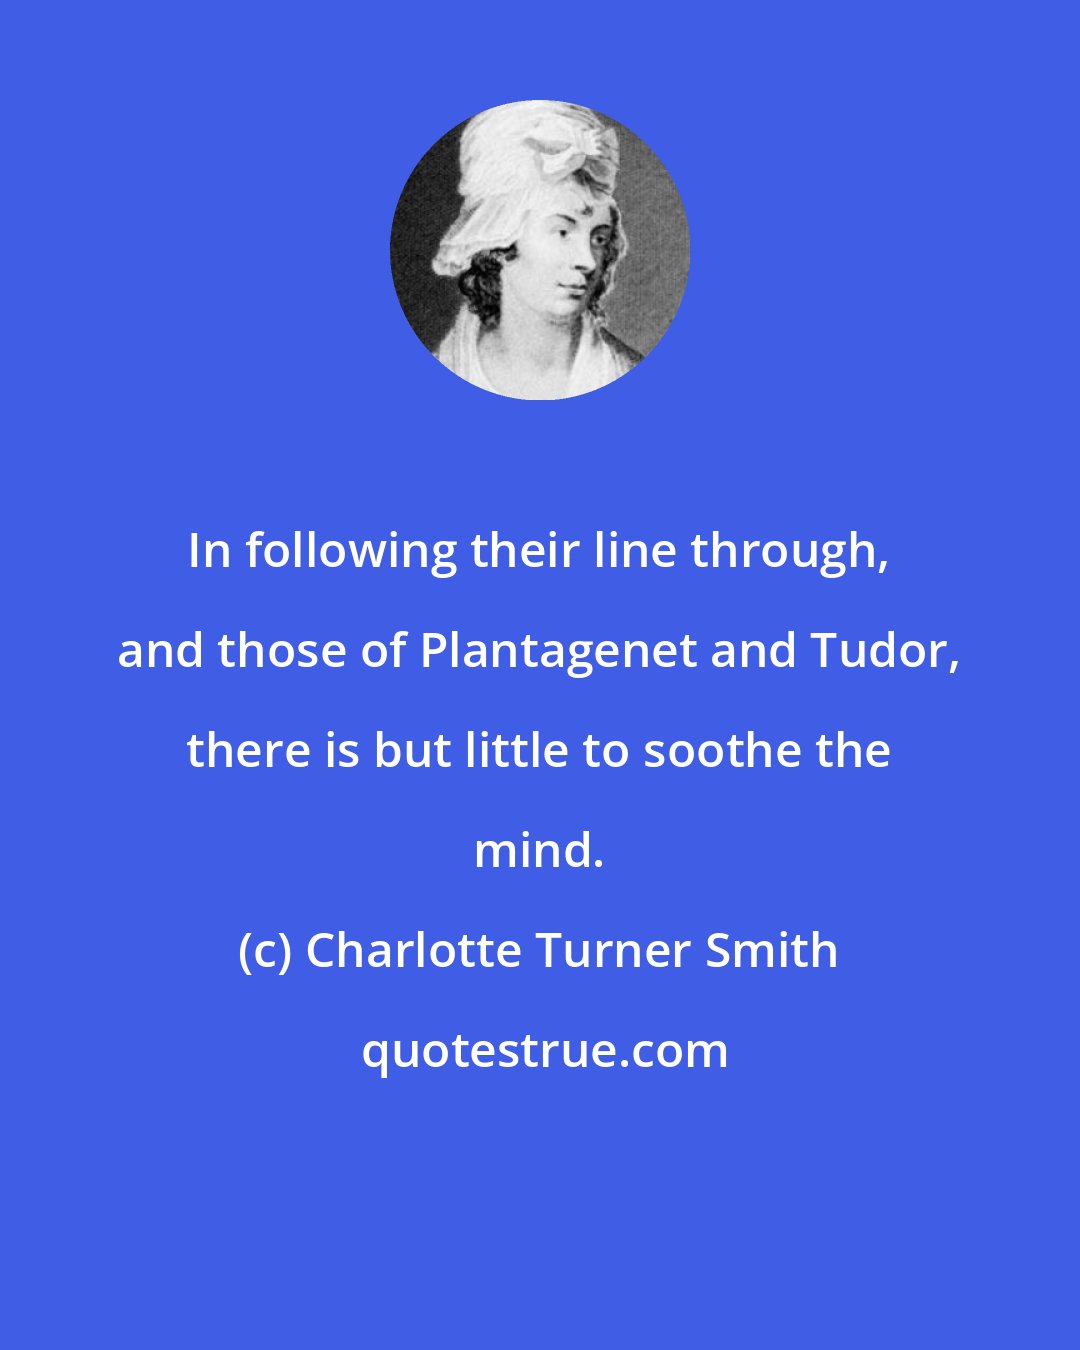 Charlotte Turner Smith: In following their line through, and those of Plantagenet and Tudor, there is but little to soothe the mind.